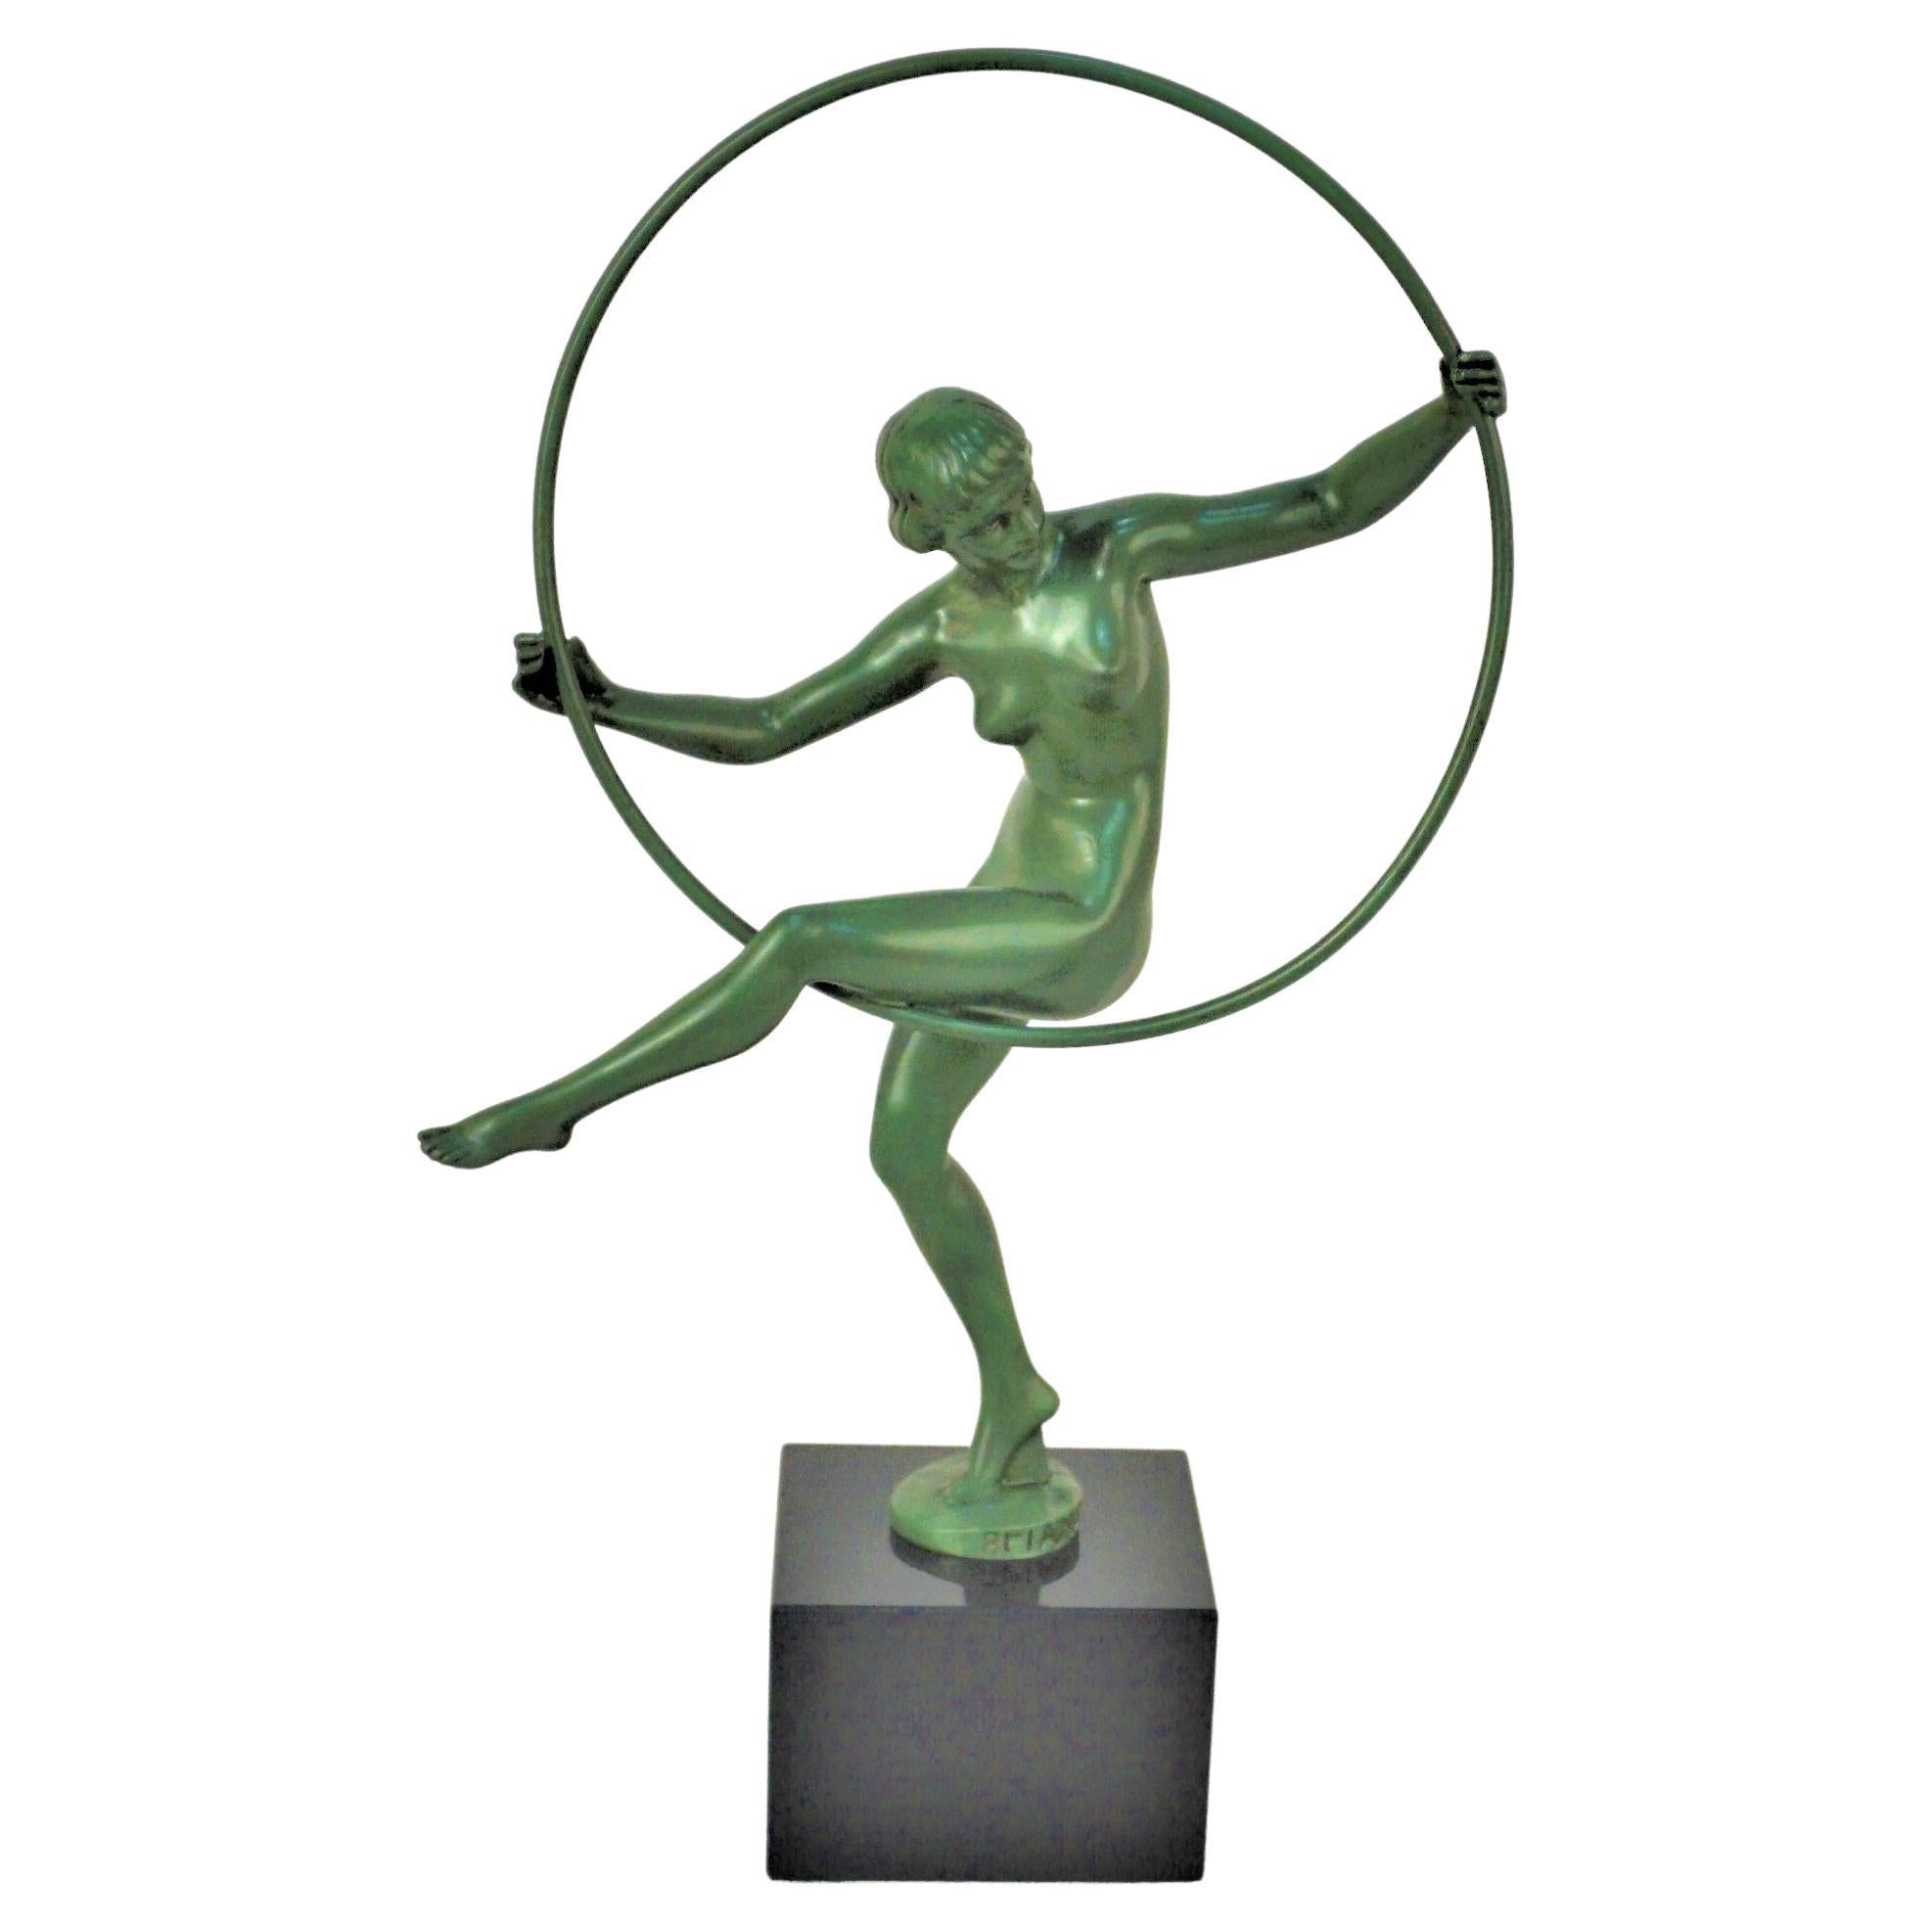 French 1930's Art Deco Sculpture Hoop Dancer Briand, Marcel Andre Bouraine For Sale